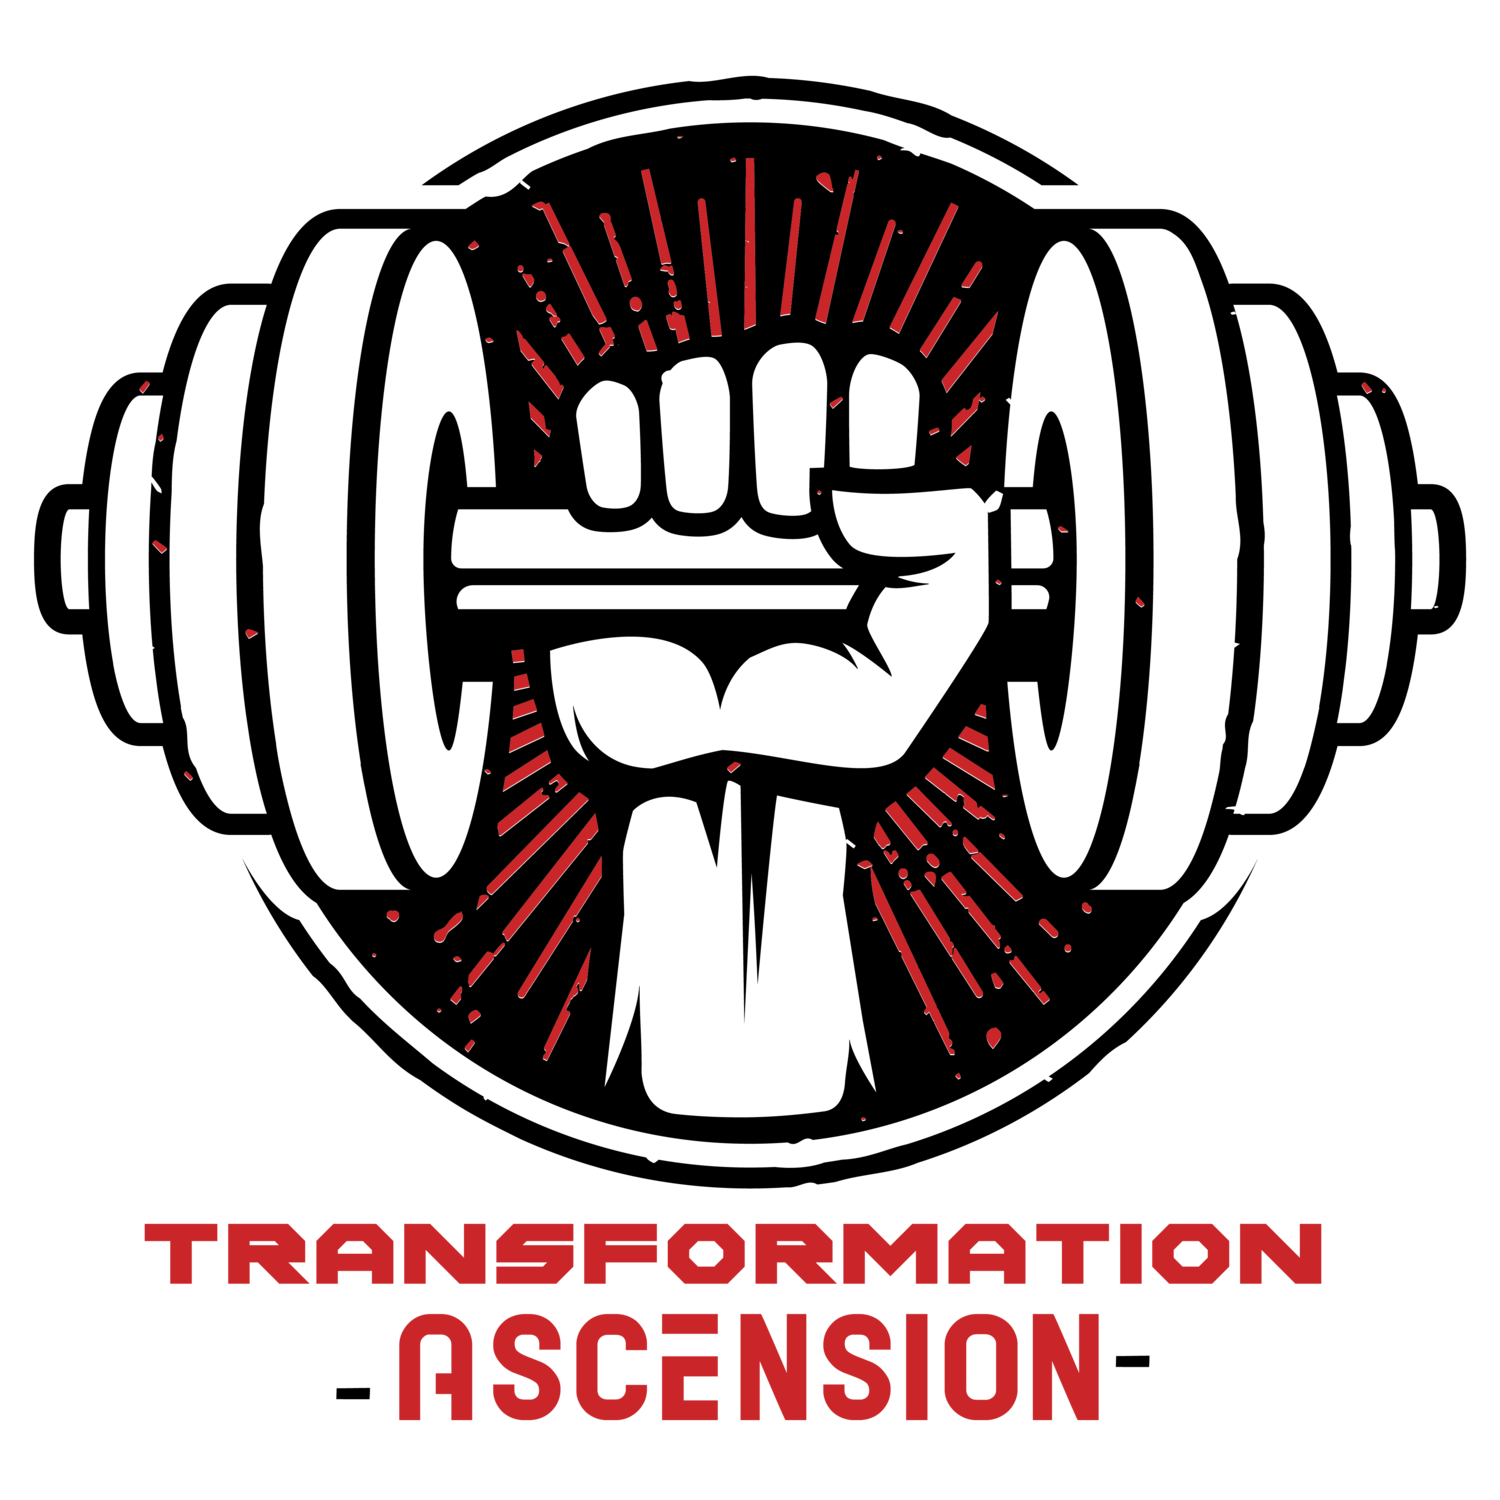 Transformation of Ascension